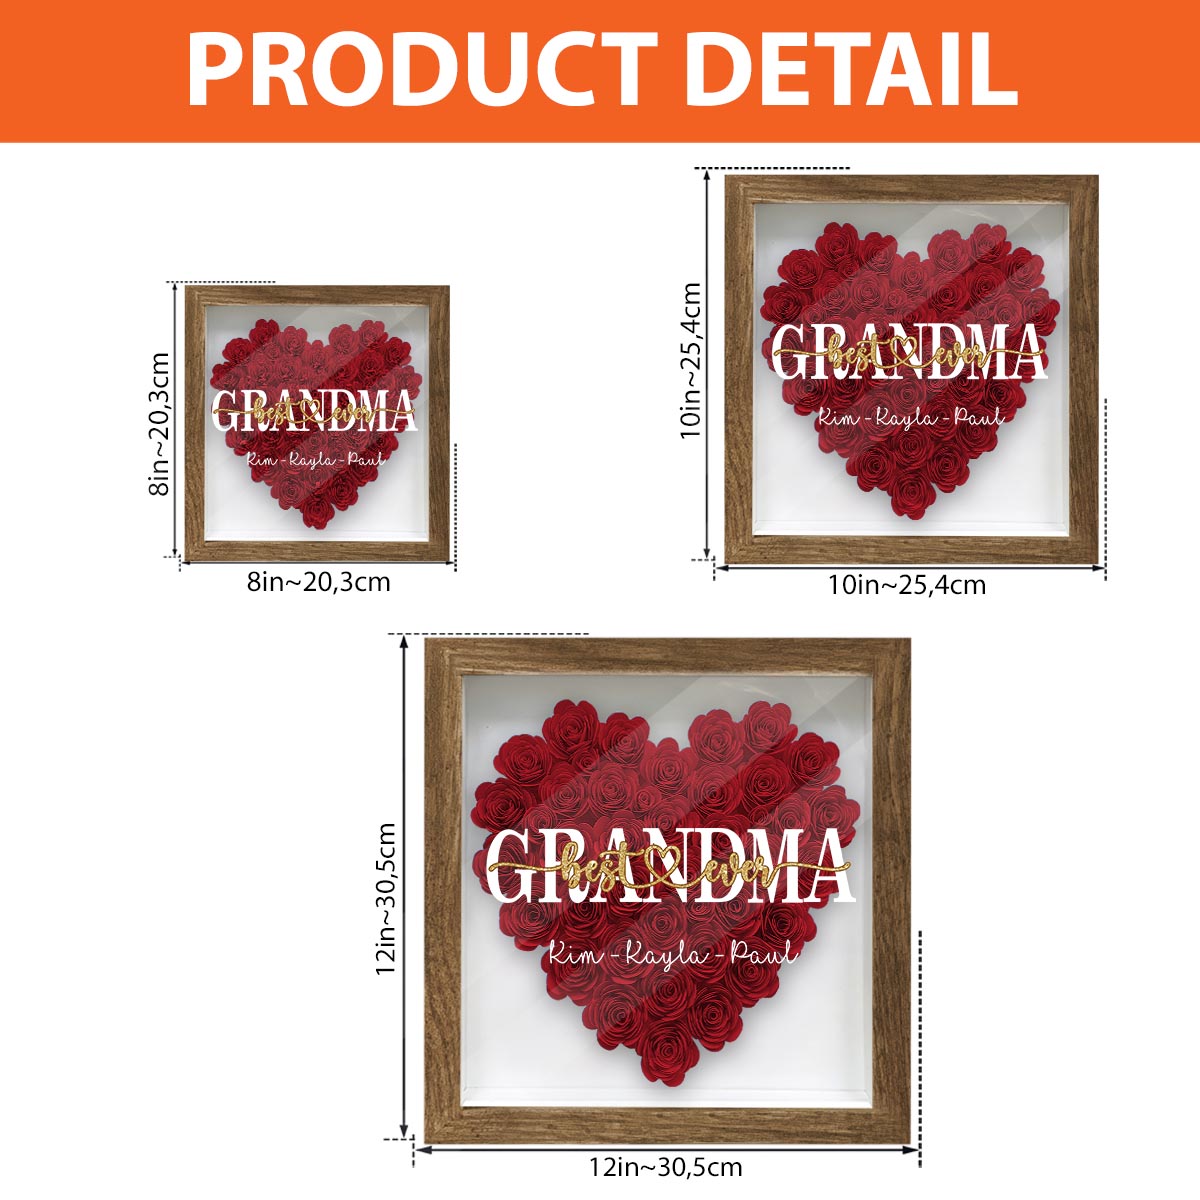 Best Mommy Ever - Gift for mom, grandma, grandpa, dad, aunt, sister -  Personalized Flower Shadow Box